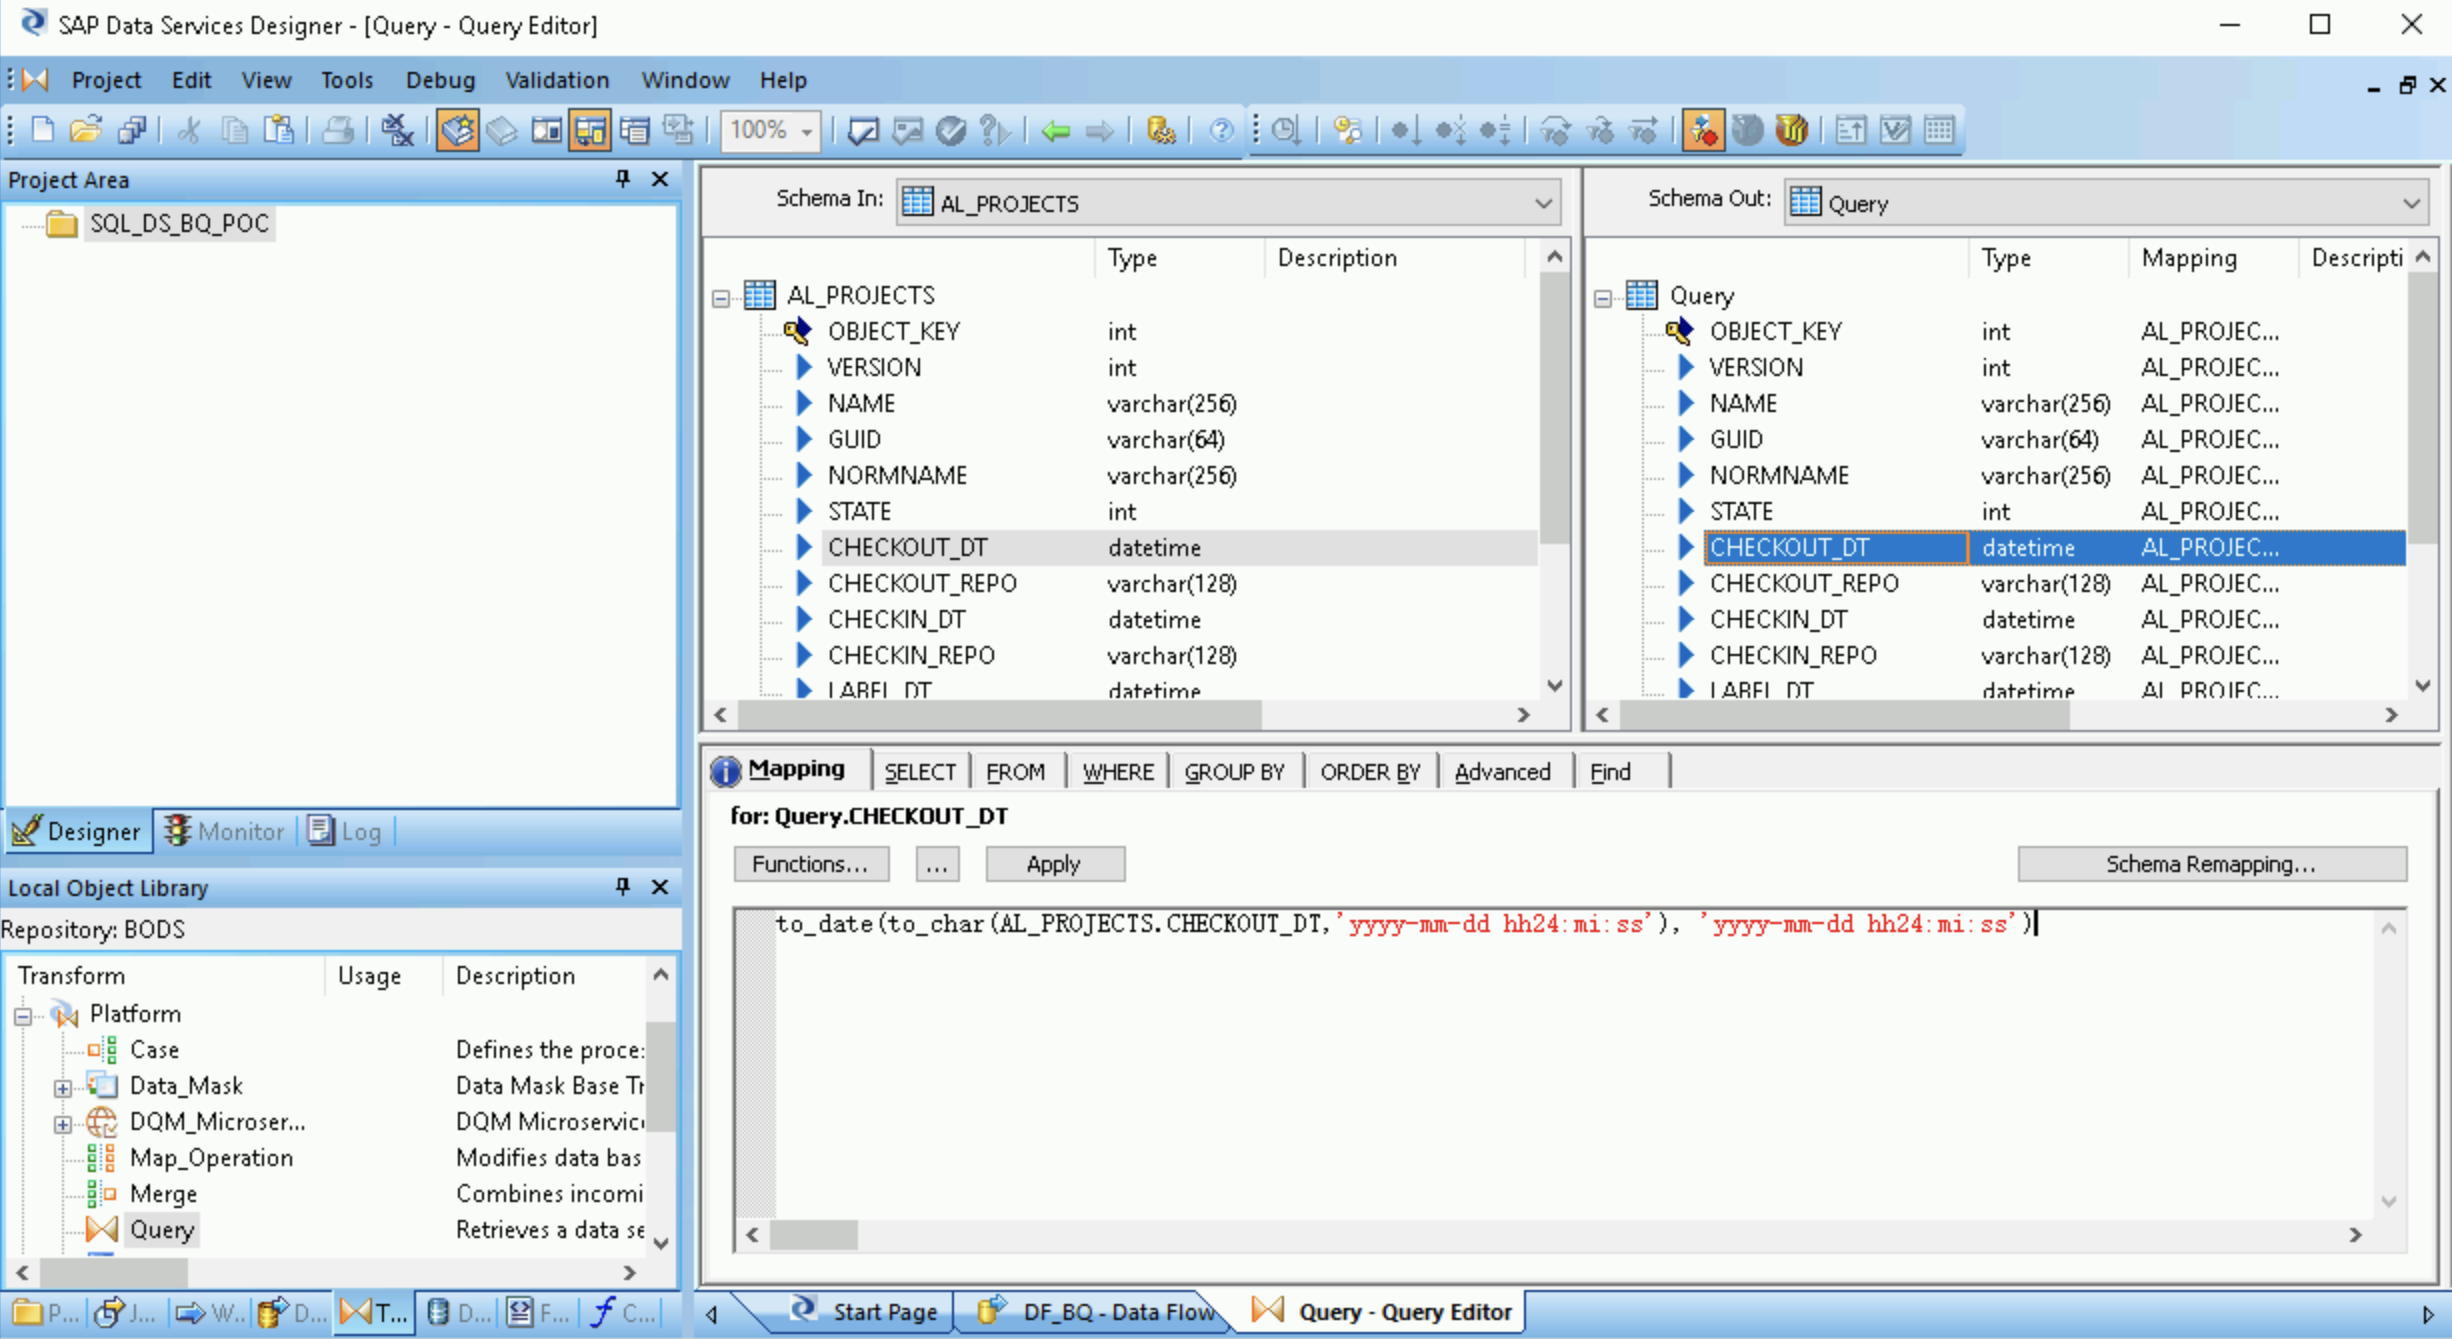 A screen capture of the SAP Data Services Designer showing the Datetime
data-type conversion for a field.